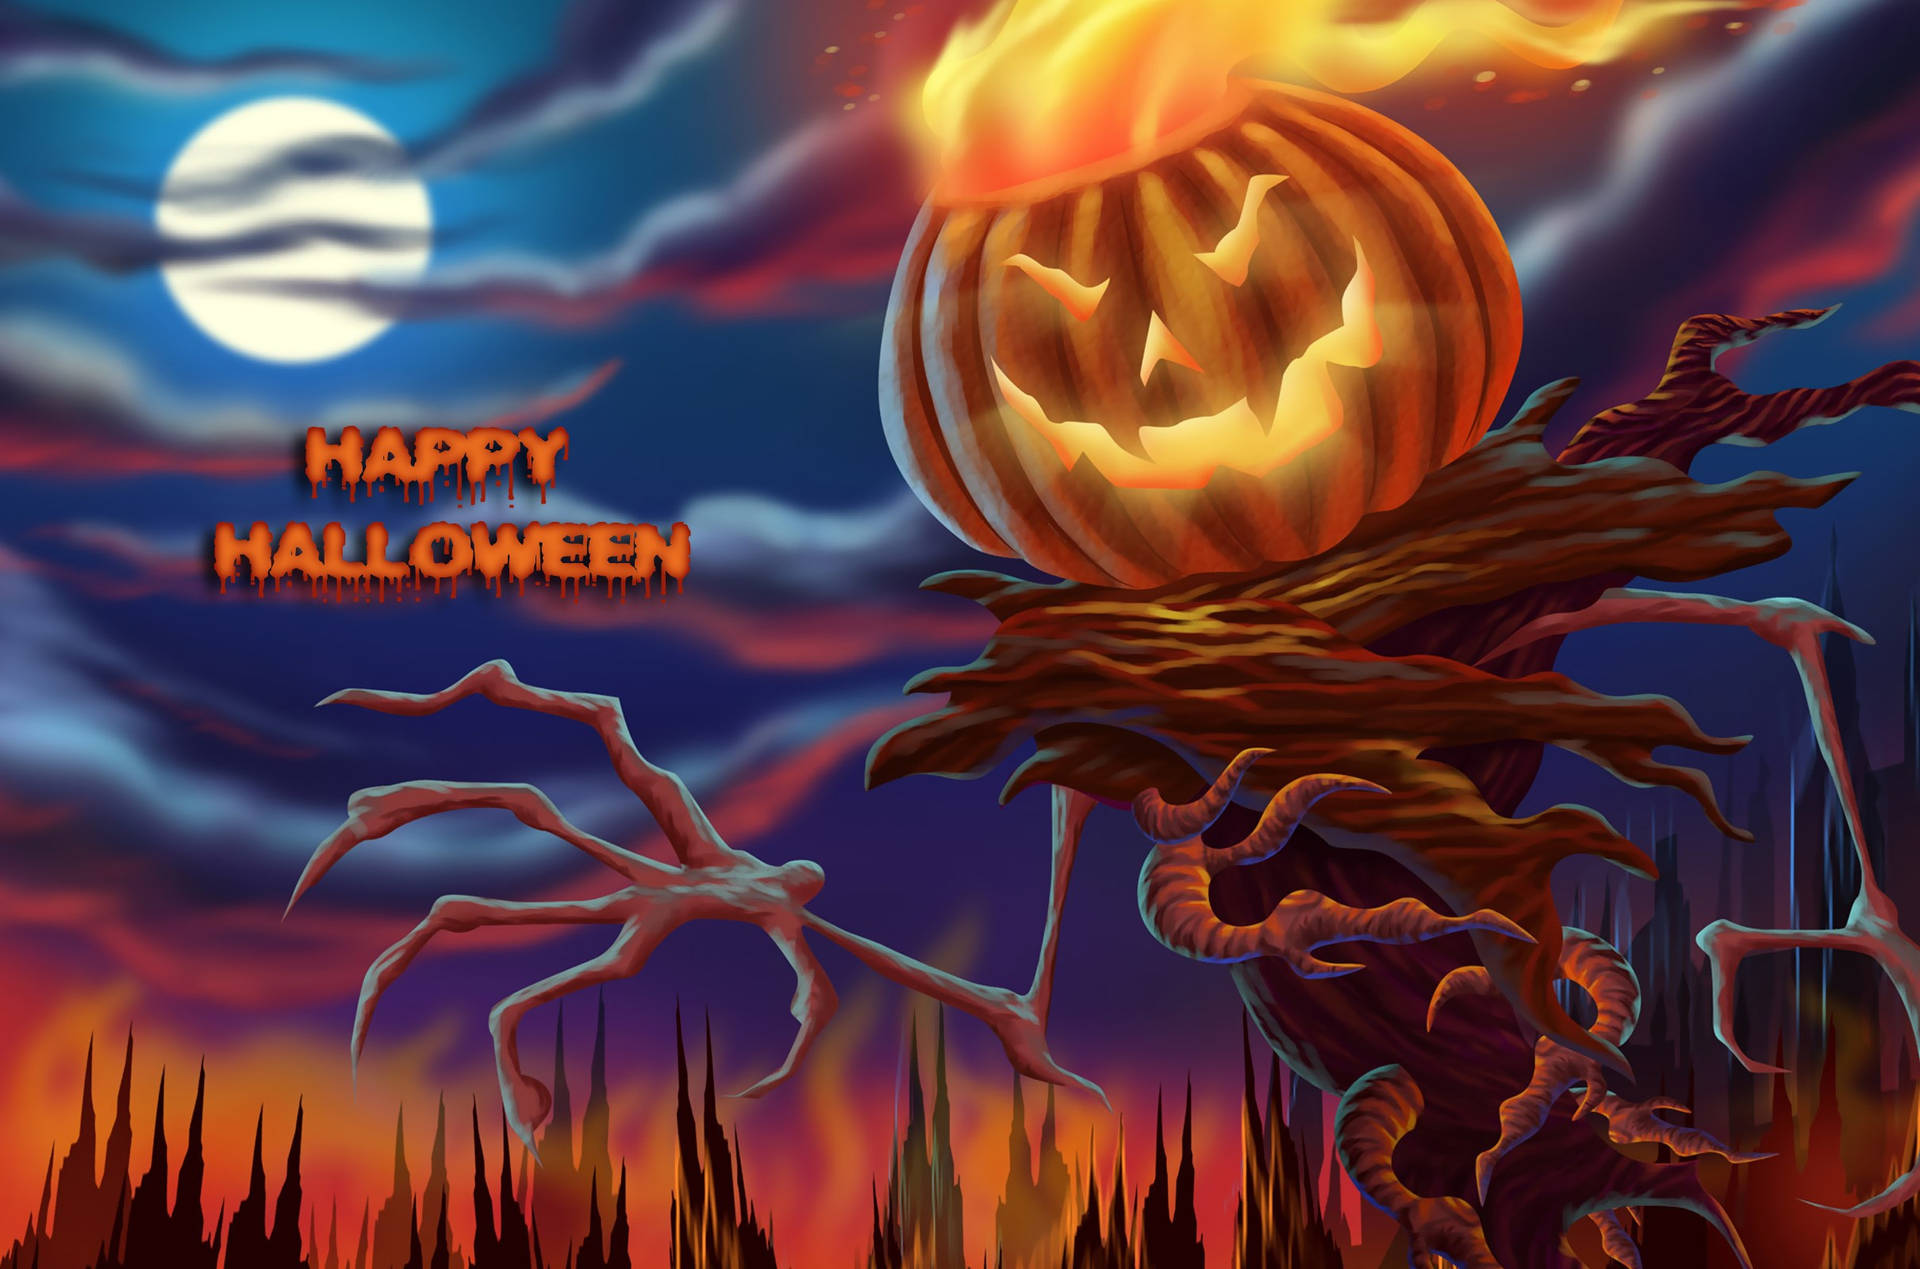 Have A Happy Halloween! Background